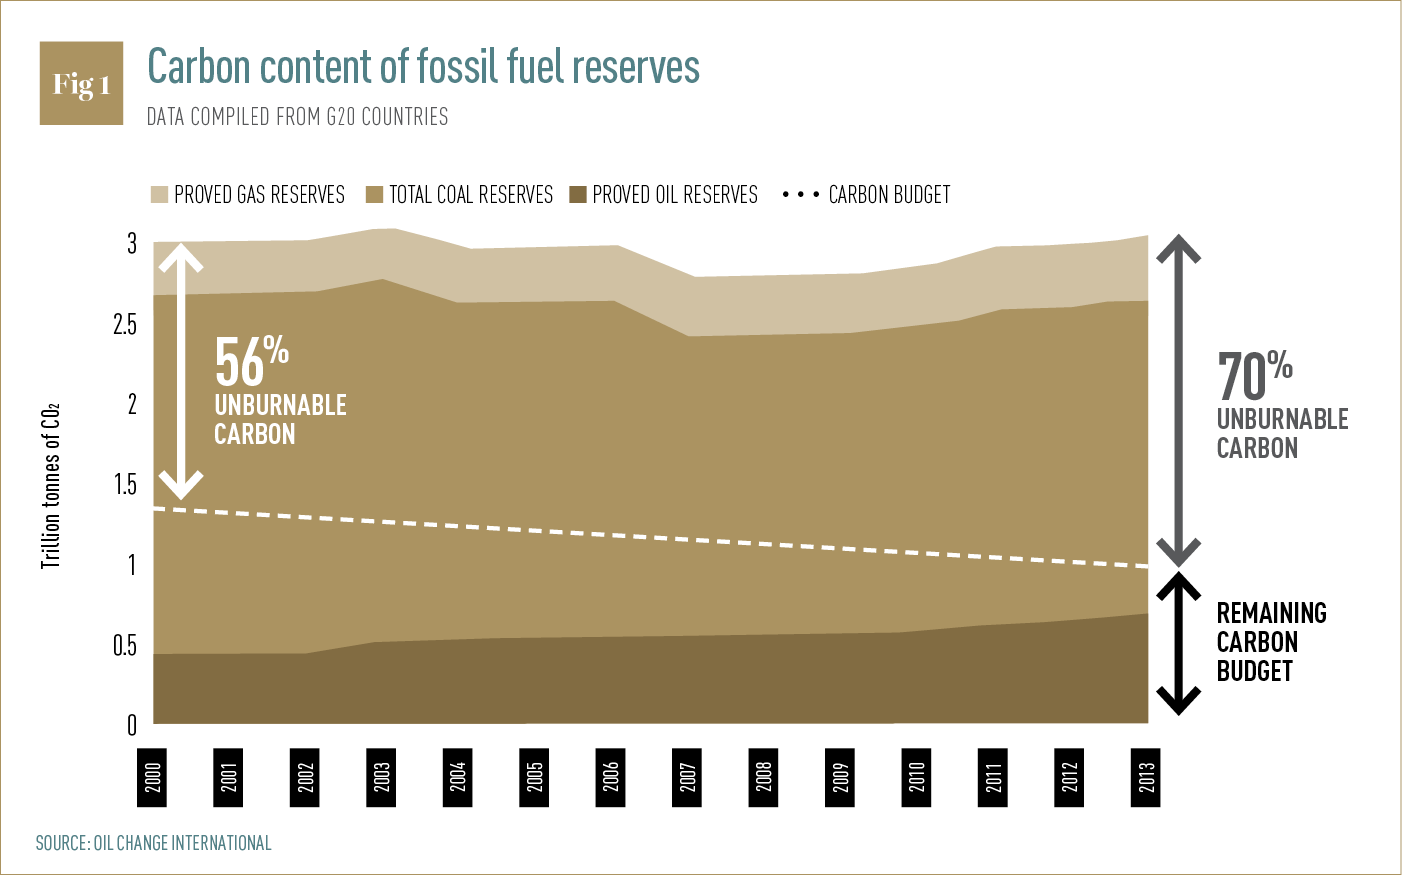 Carbon content of fossil fuel reserves